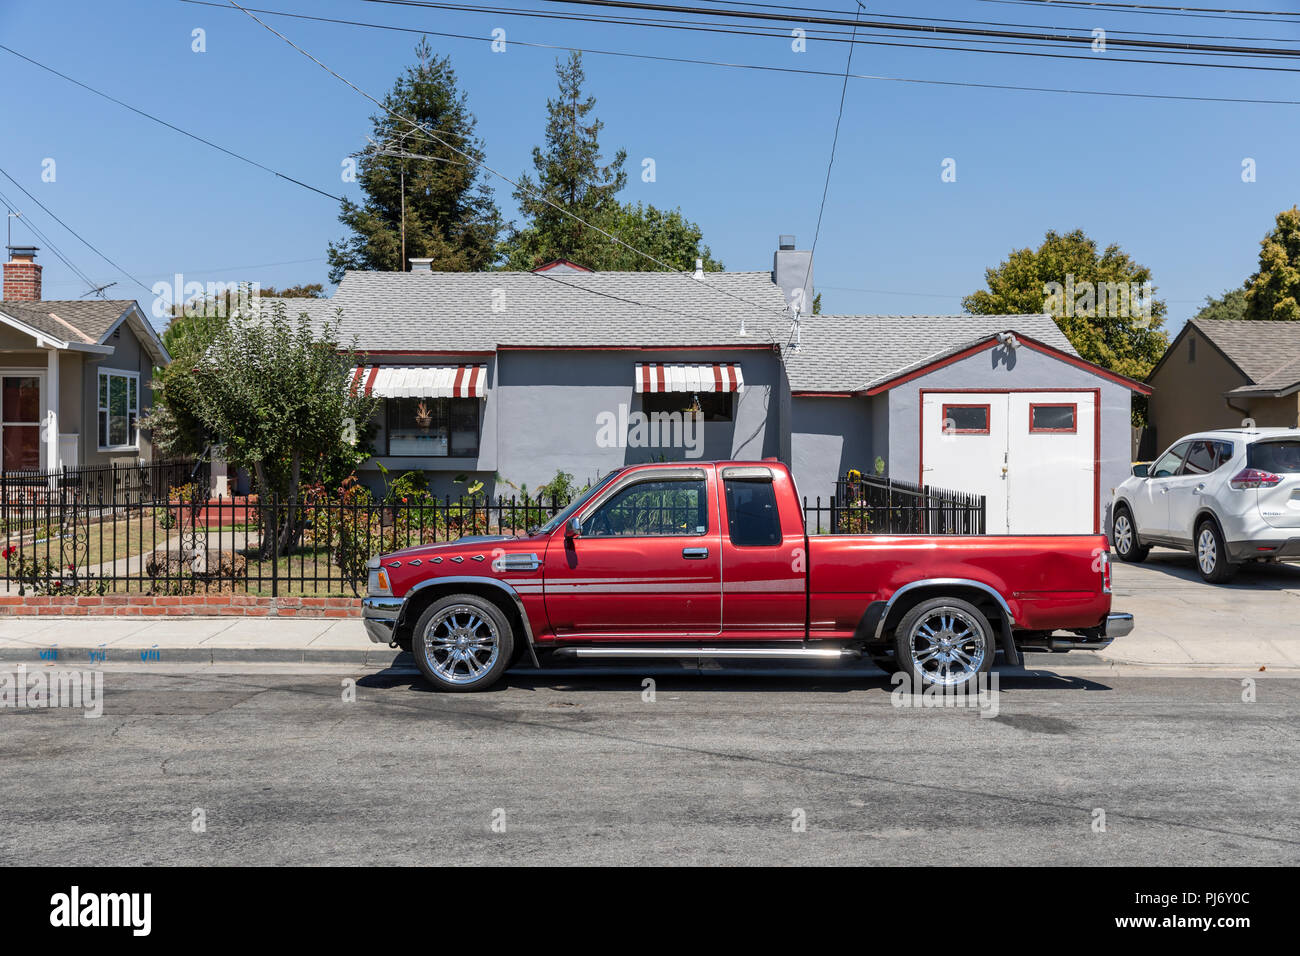 Pickup truck parked in front of home; Sunnyvale, California Stock Photo